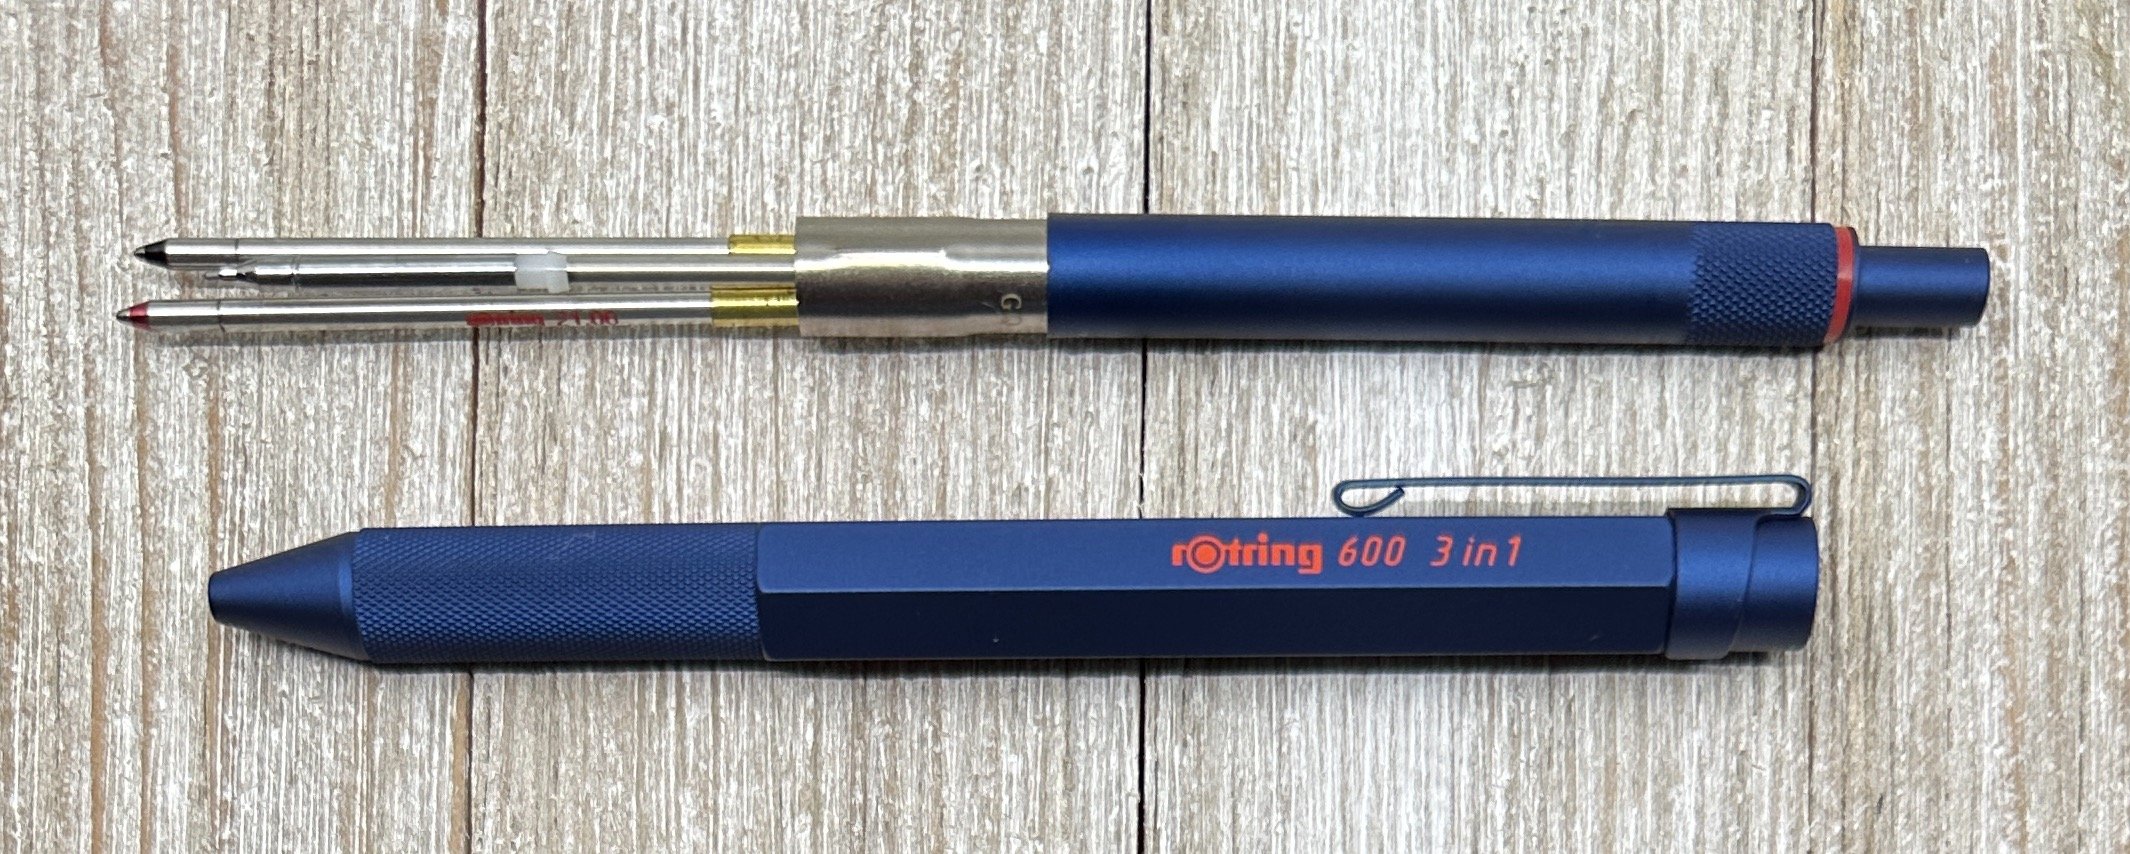 rOtring 600 after 7 months of use. : r/pens